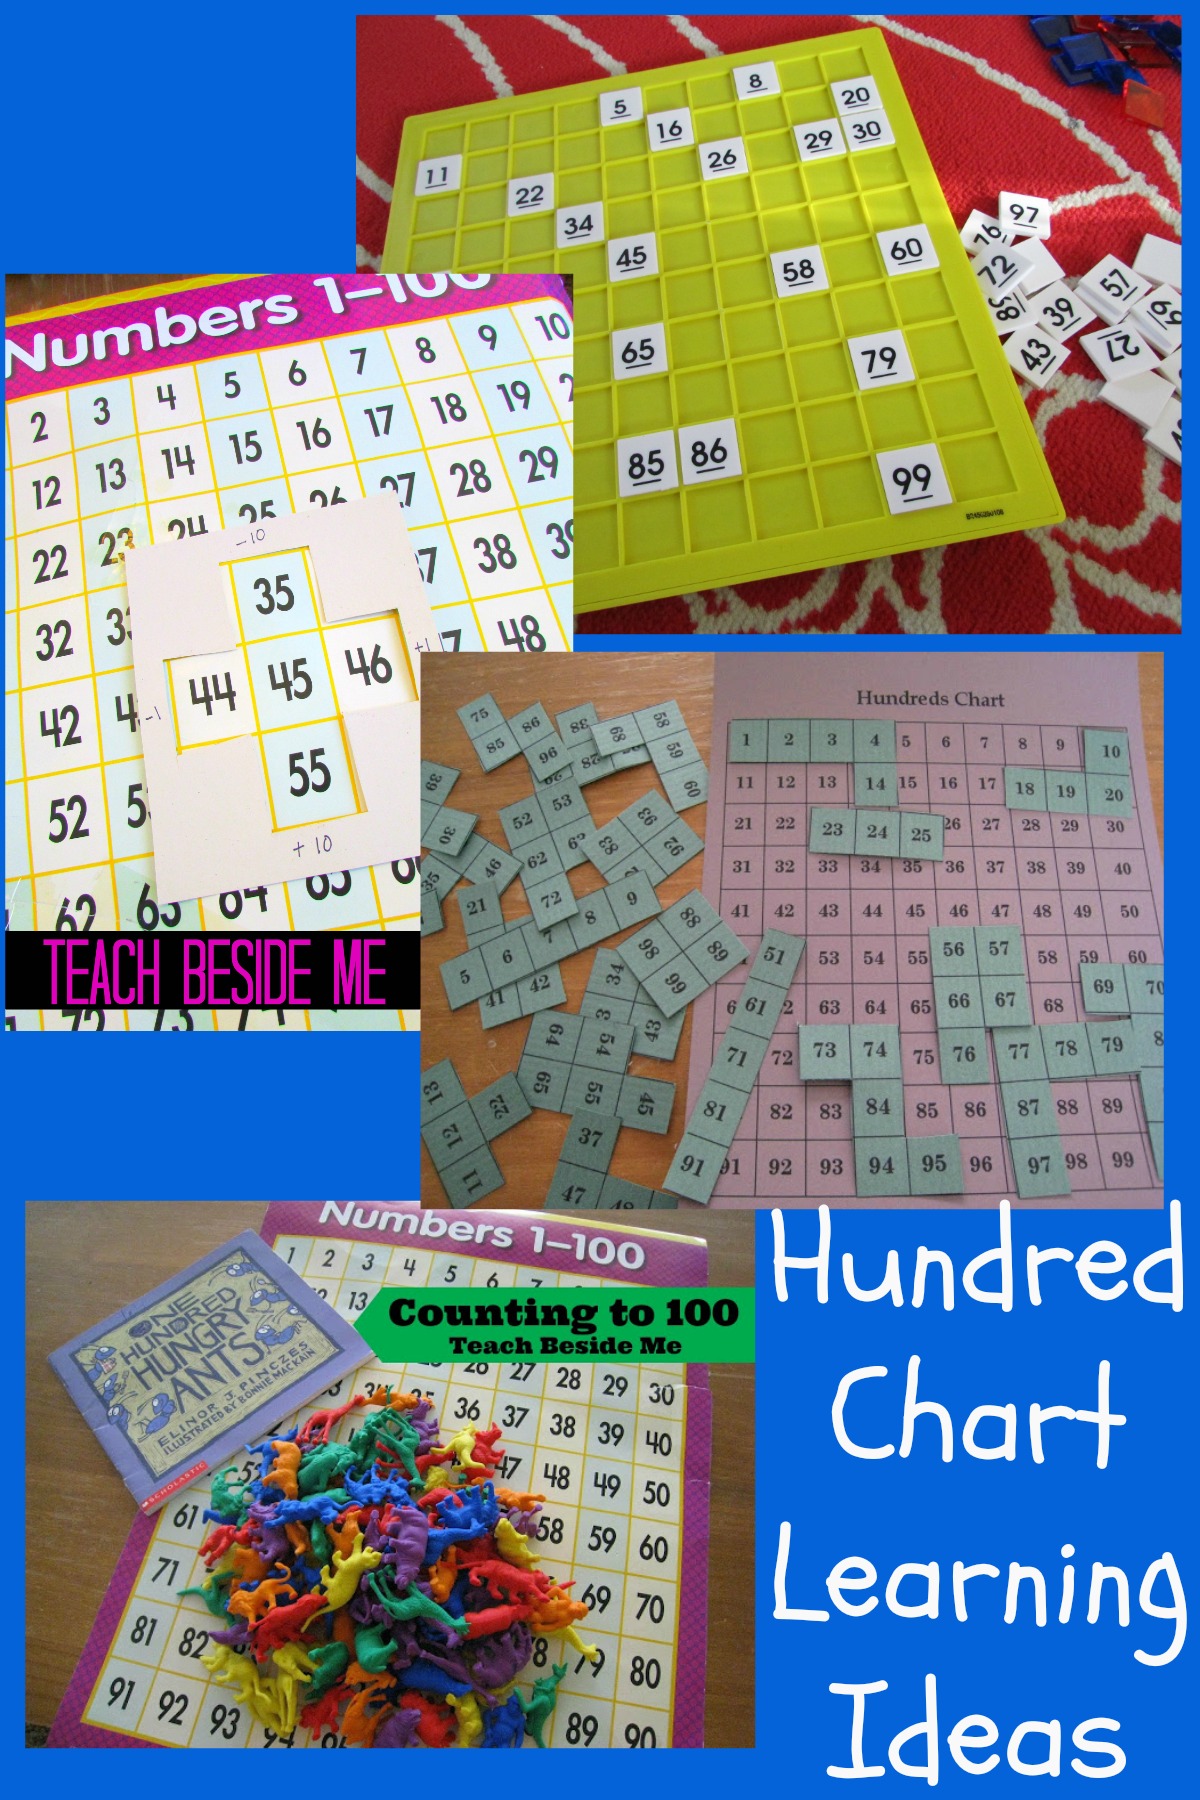 Hundred Chart Learning Ideas from Teach Beside Me